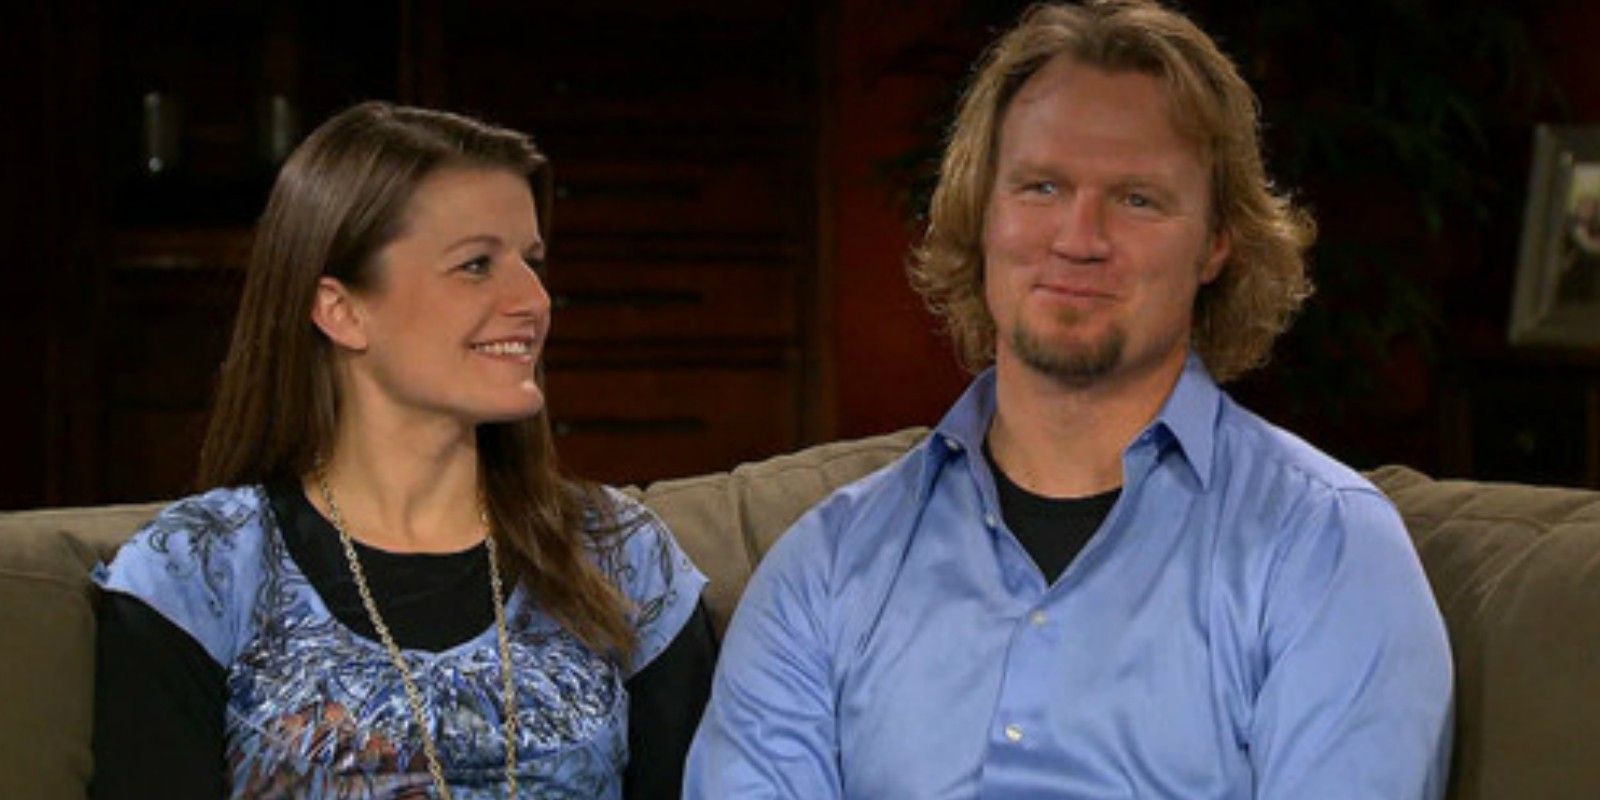 Kody and Robyn from Sister Wives